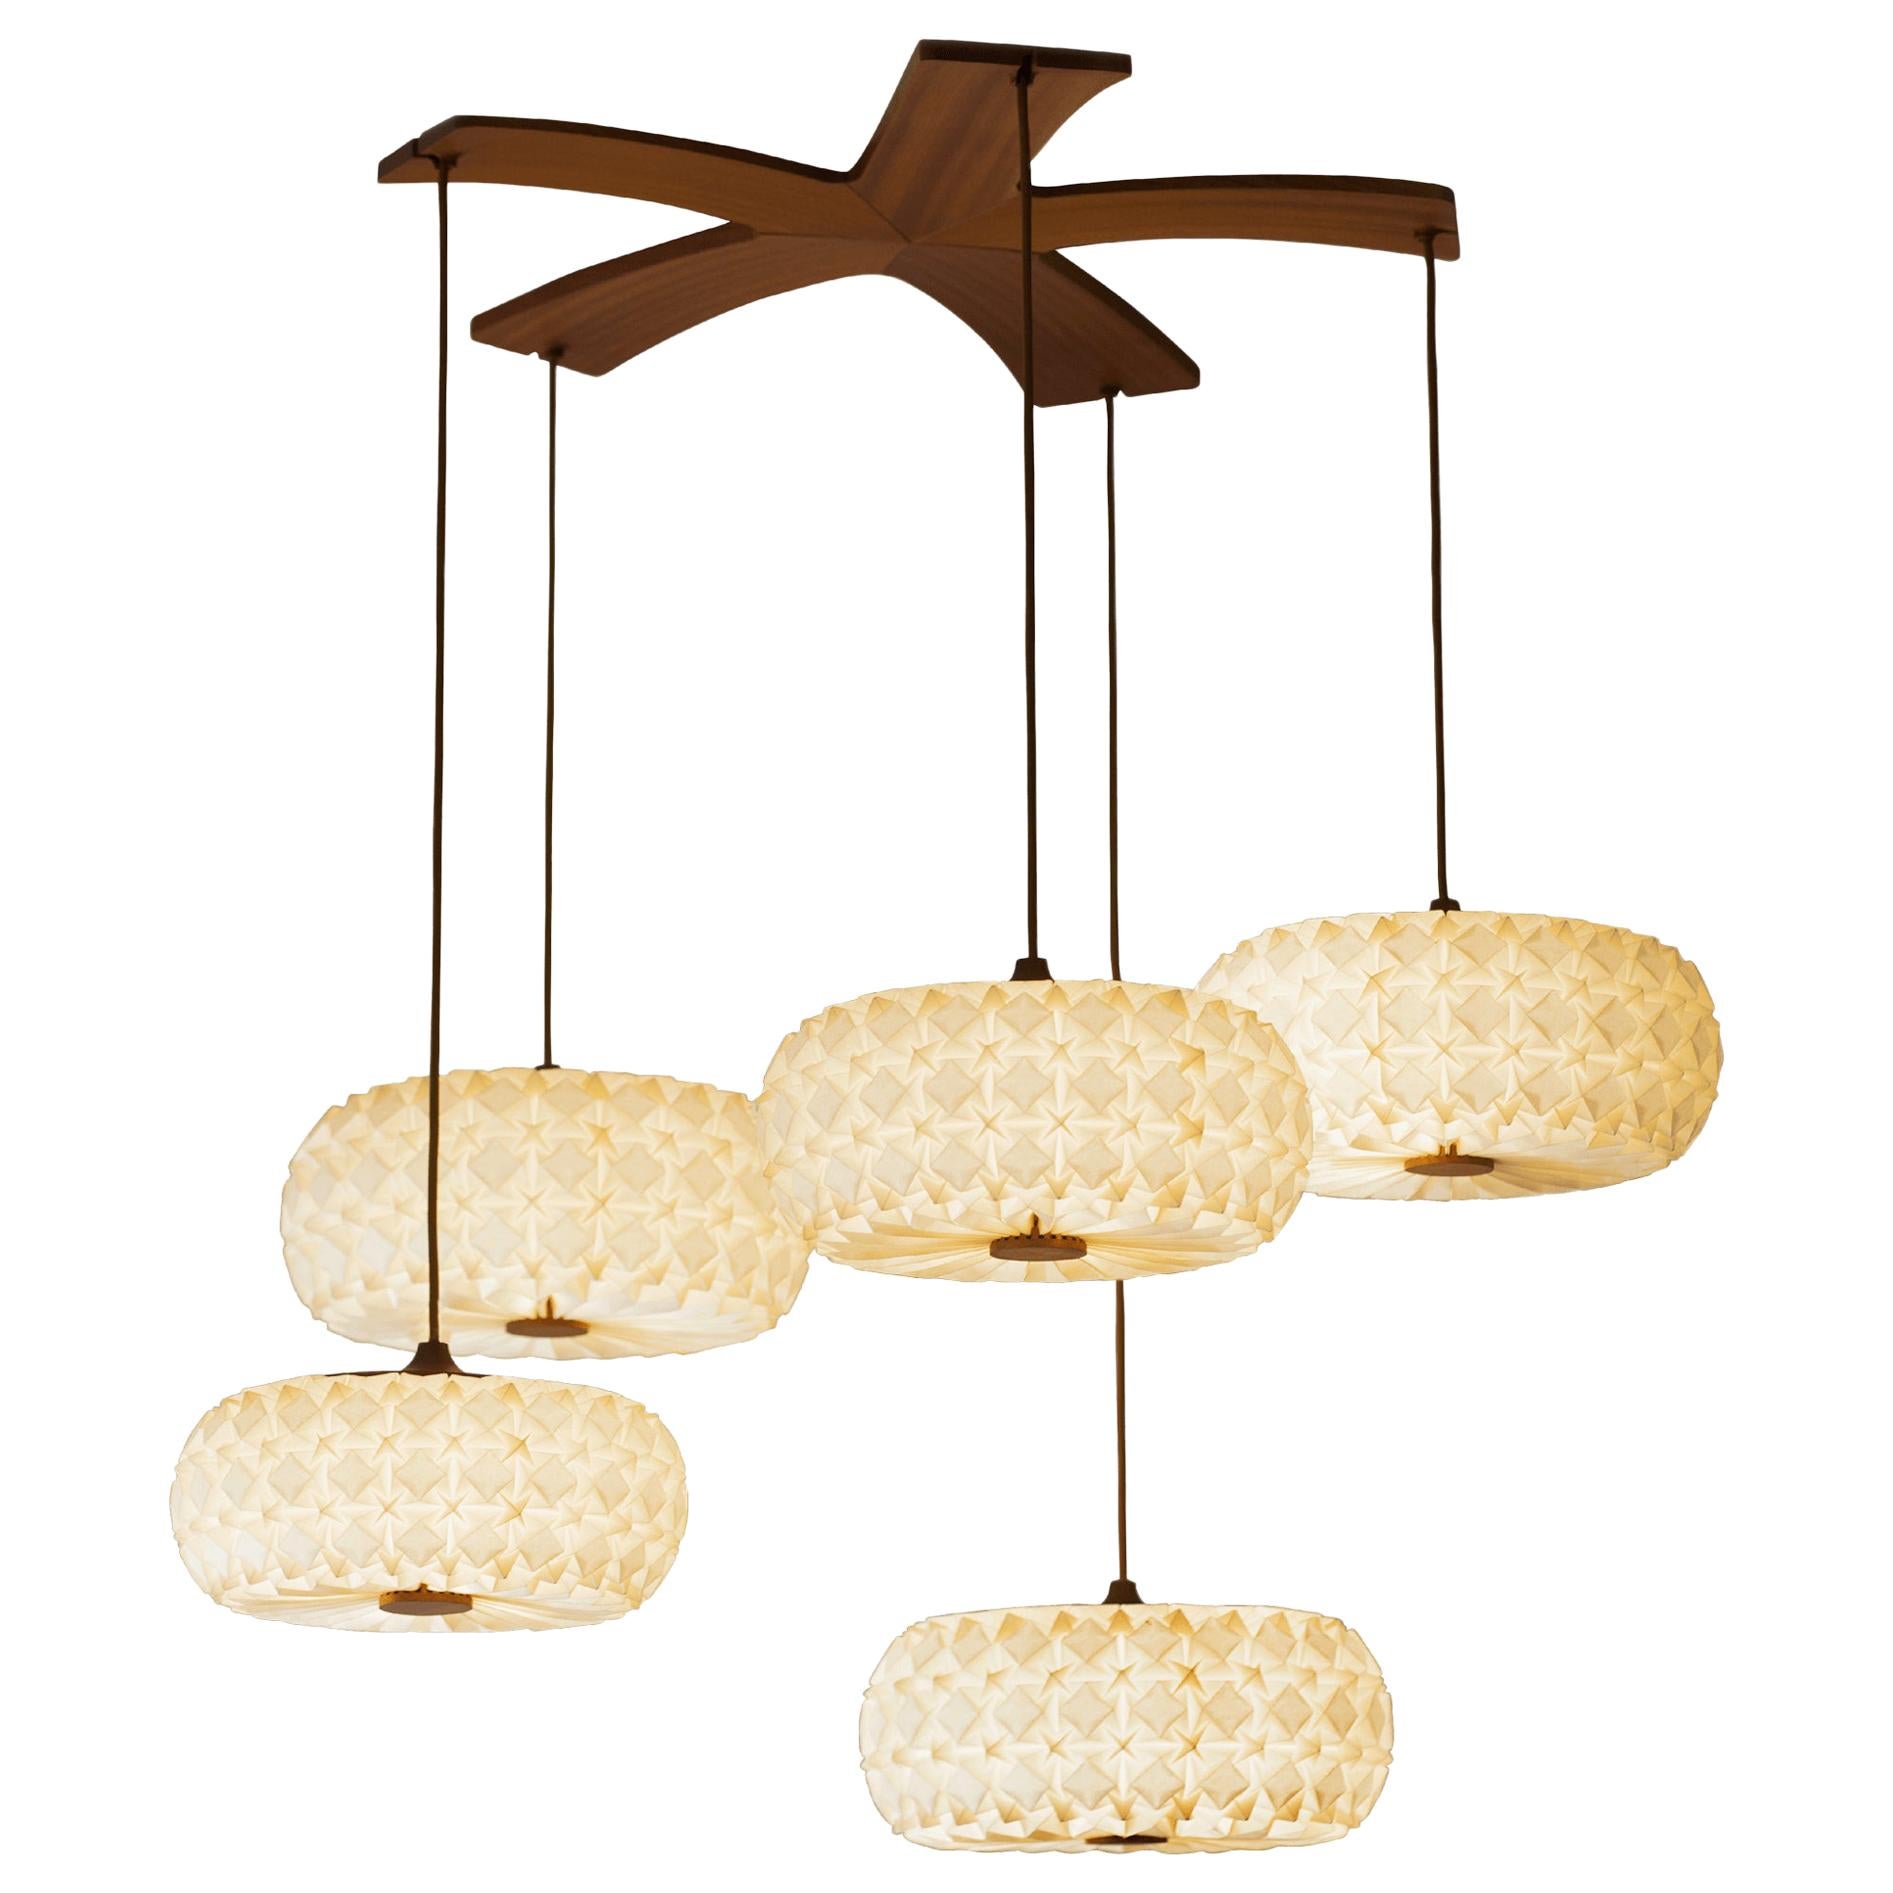 Origami Paper and Mahogany "5 Molecules" Chandelier by Aqua Creations